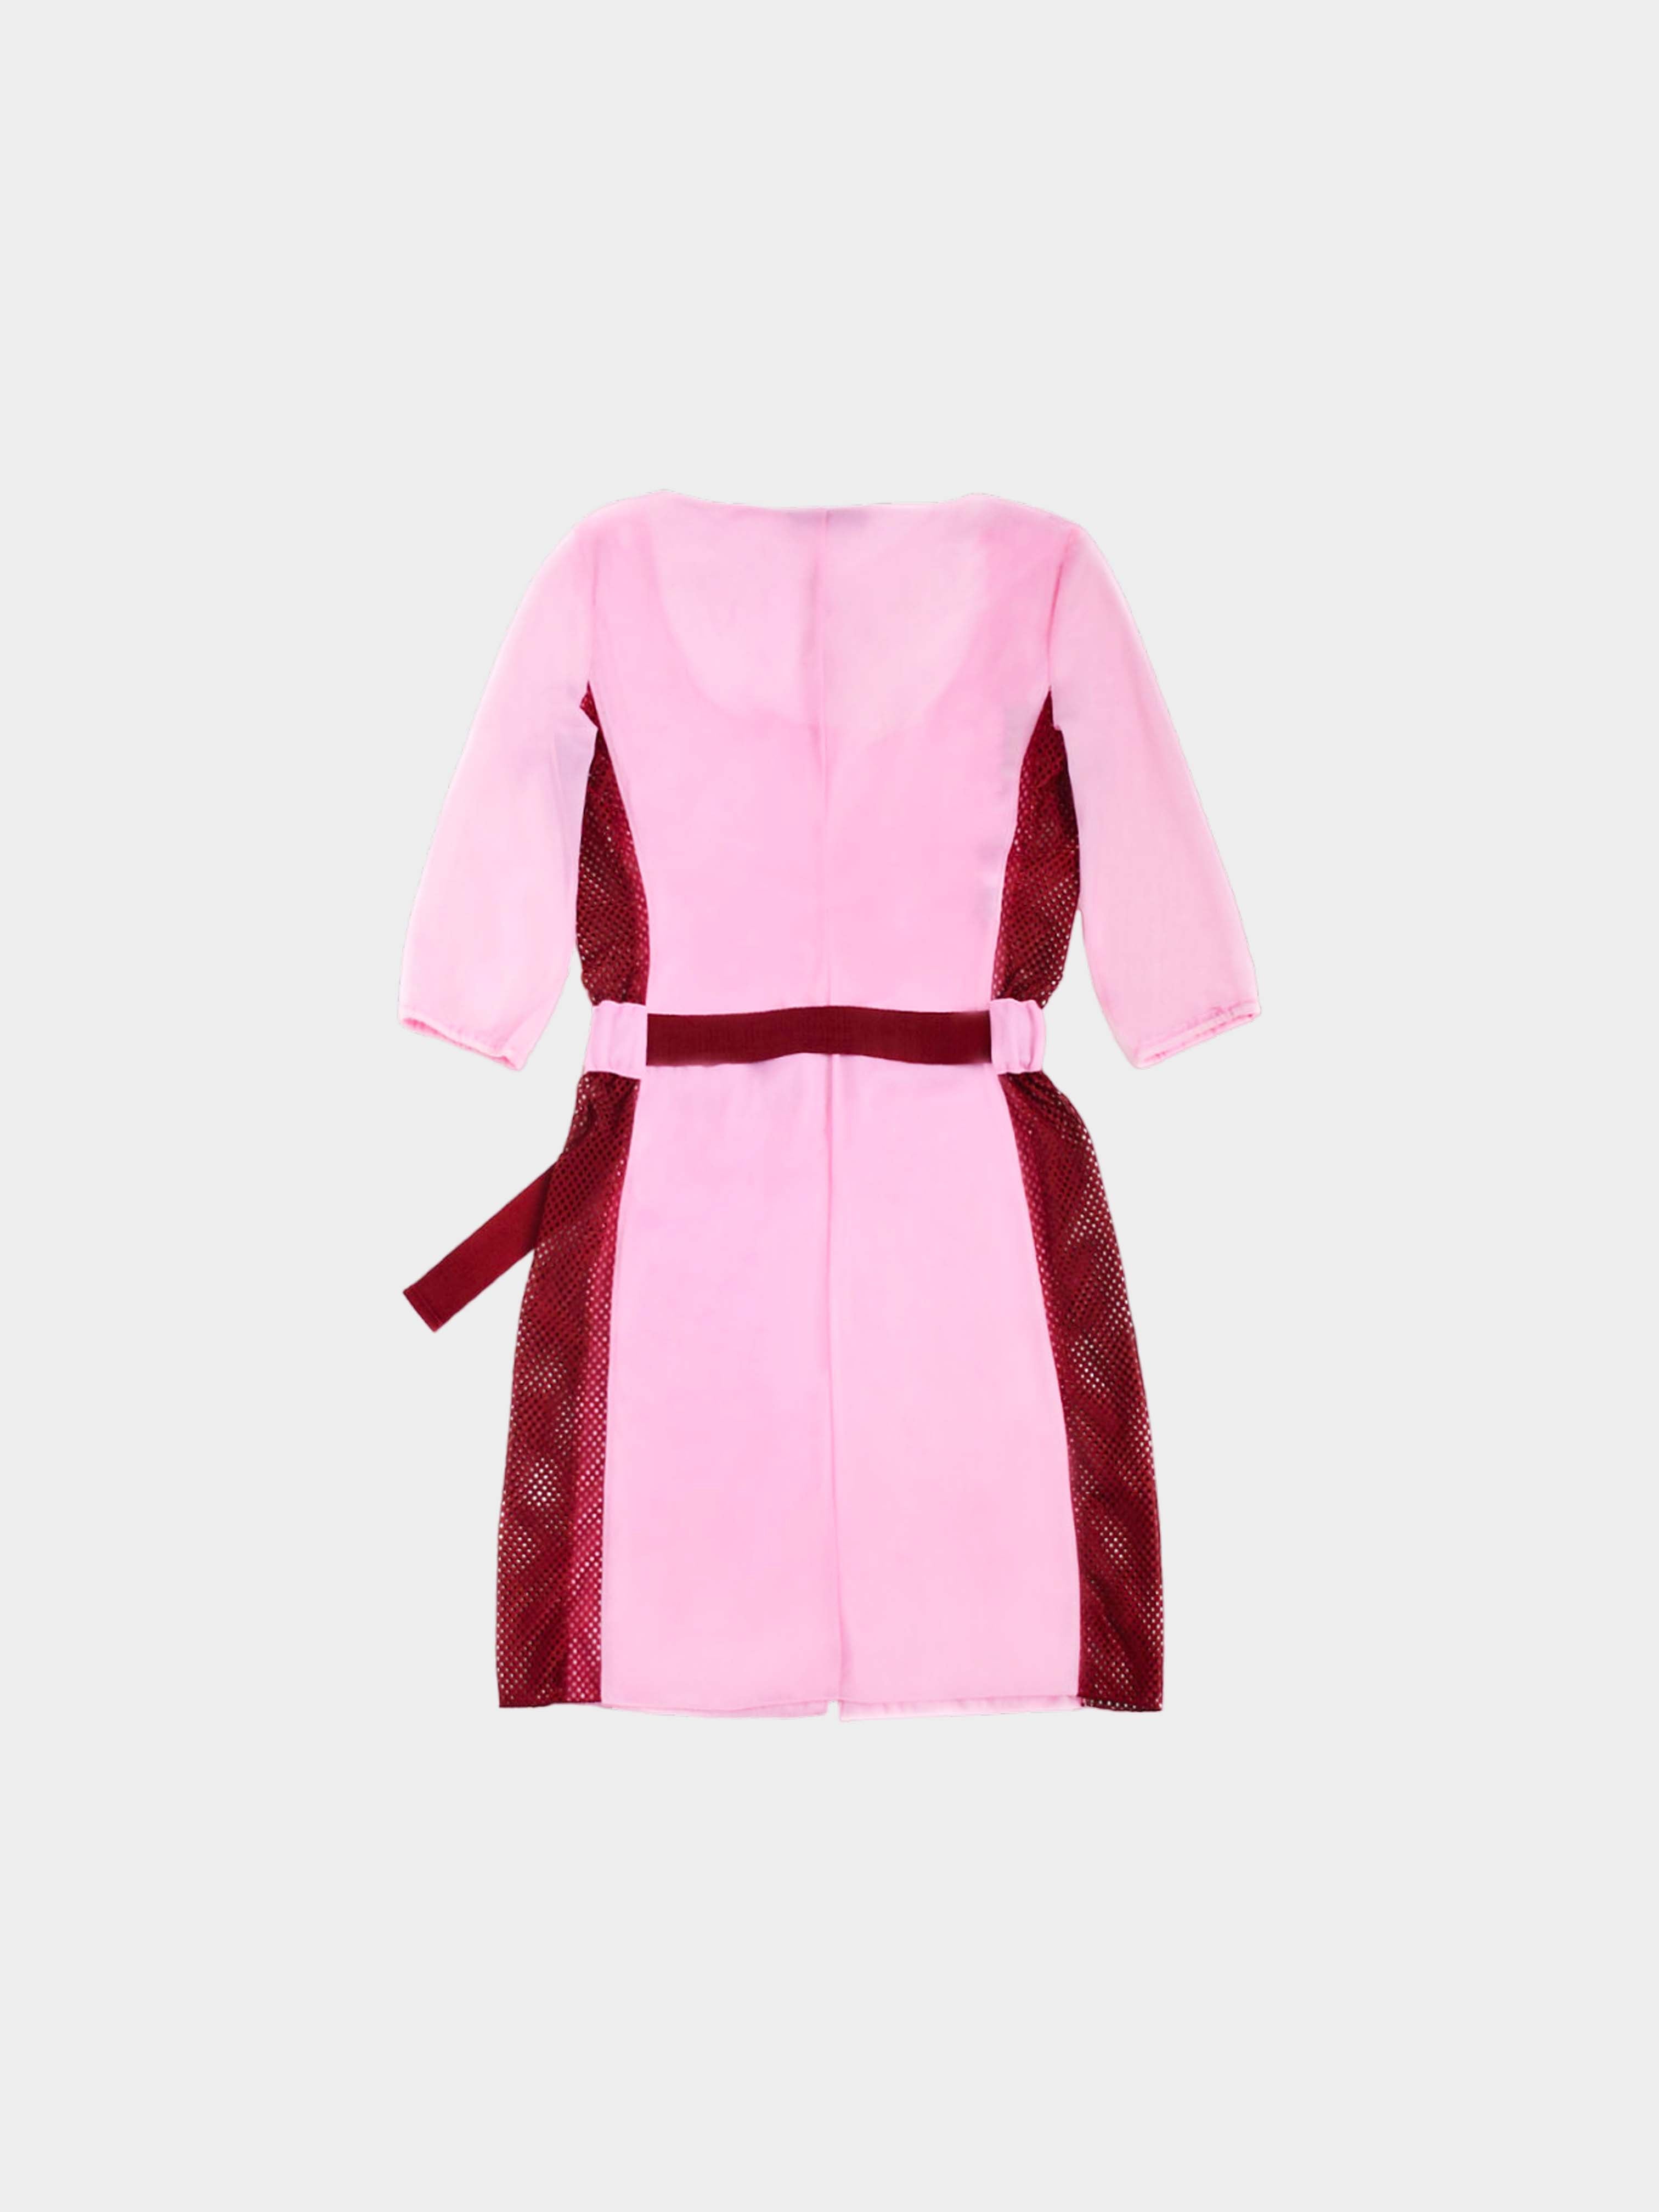 Miu Miu SS 2000 Pink and Maroon Perforated Belted Dress